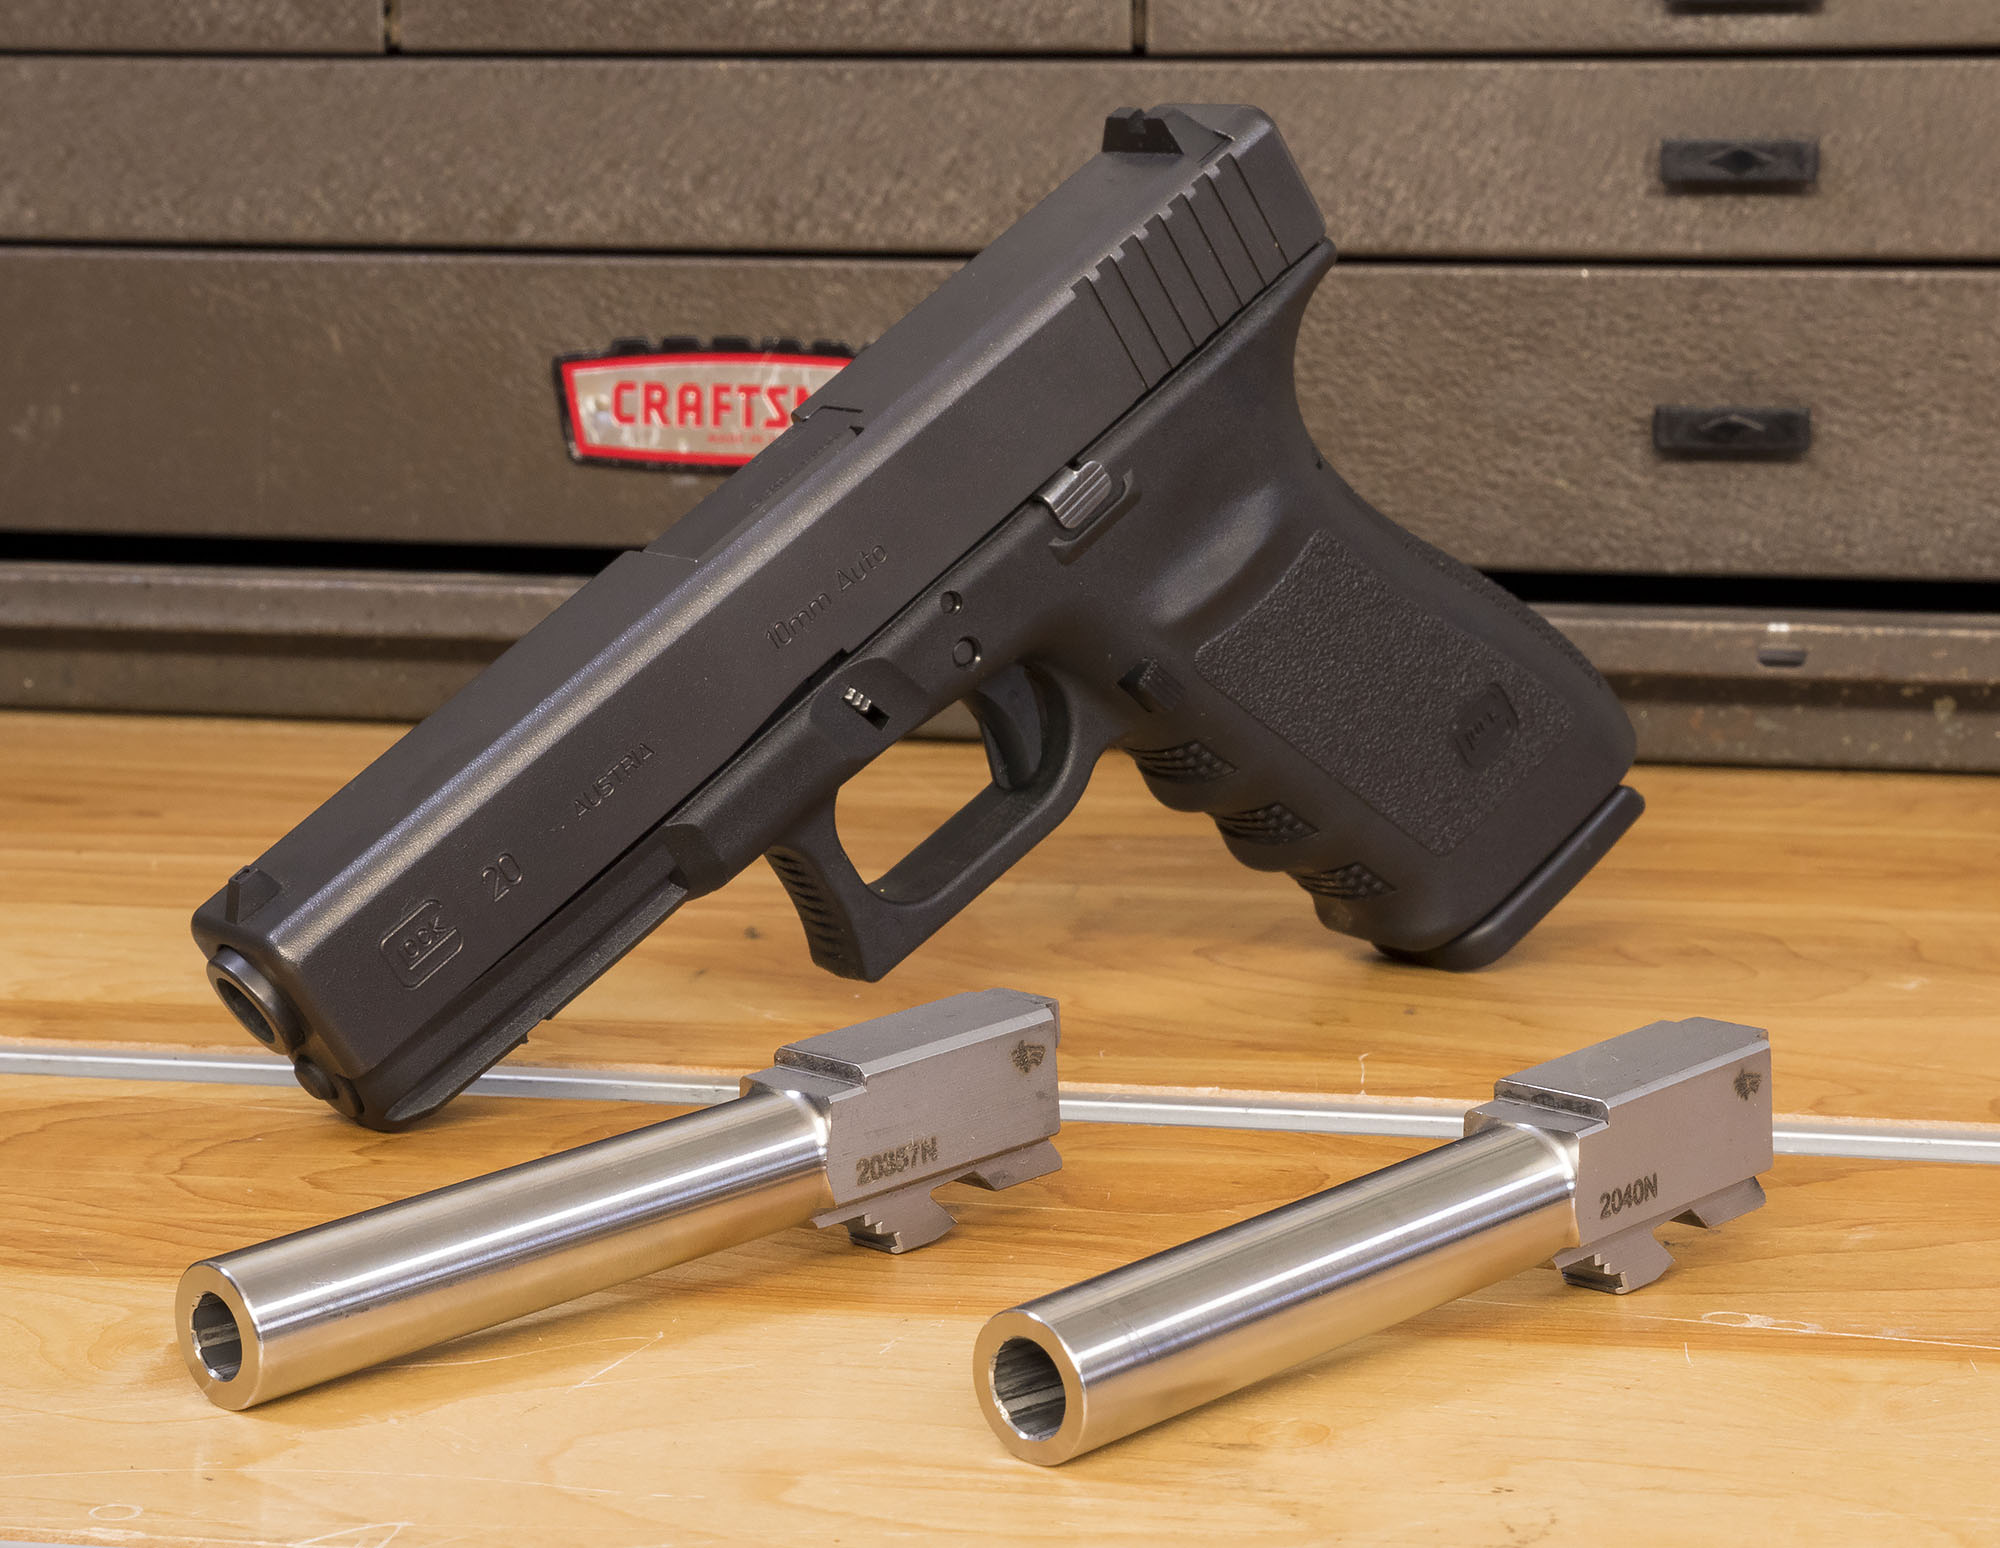 Above you see my Glock 20SF with 10mm Auto factory barrel, the. foreground,...